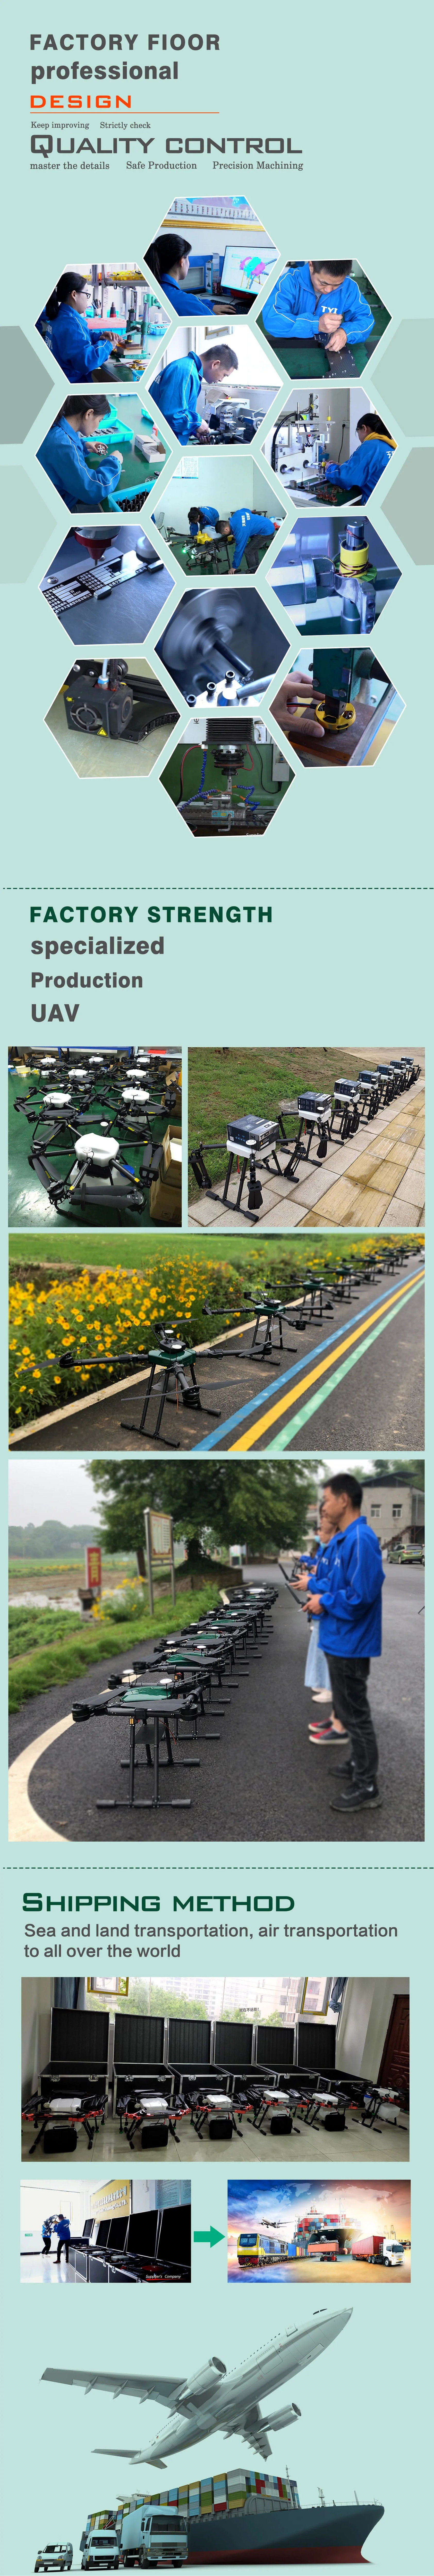 TYI TYI4-10L 10L Agricultrure Drone, FACTORY FIOOR professional DESIGN Keep improving Strictly check QUALITY